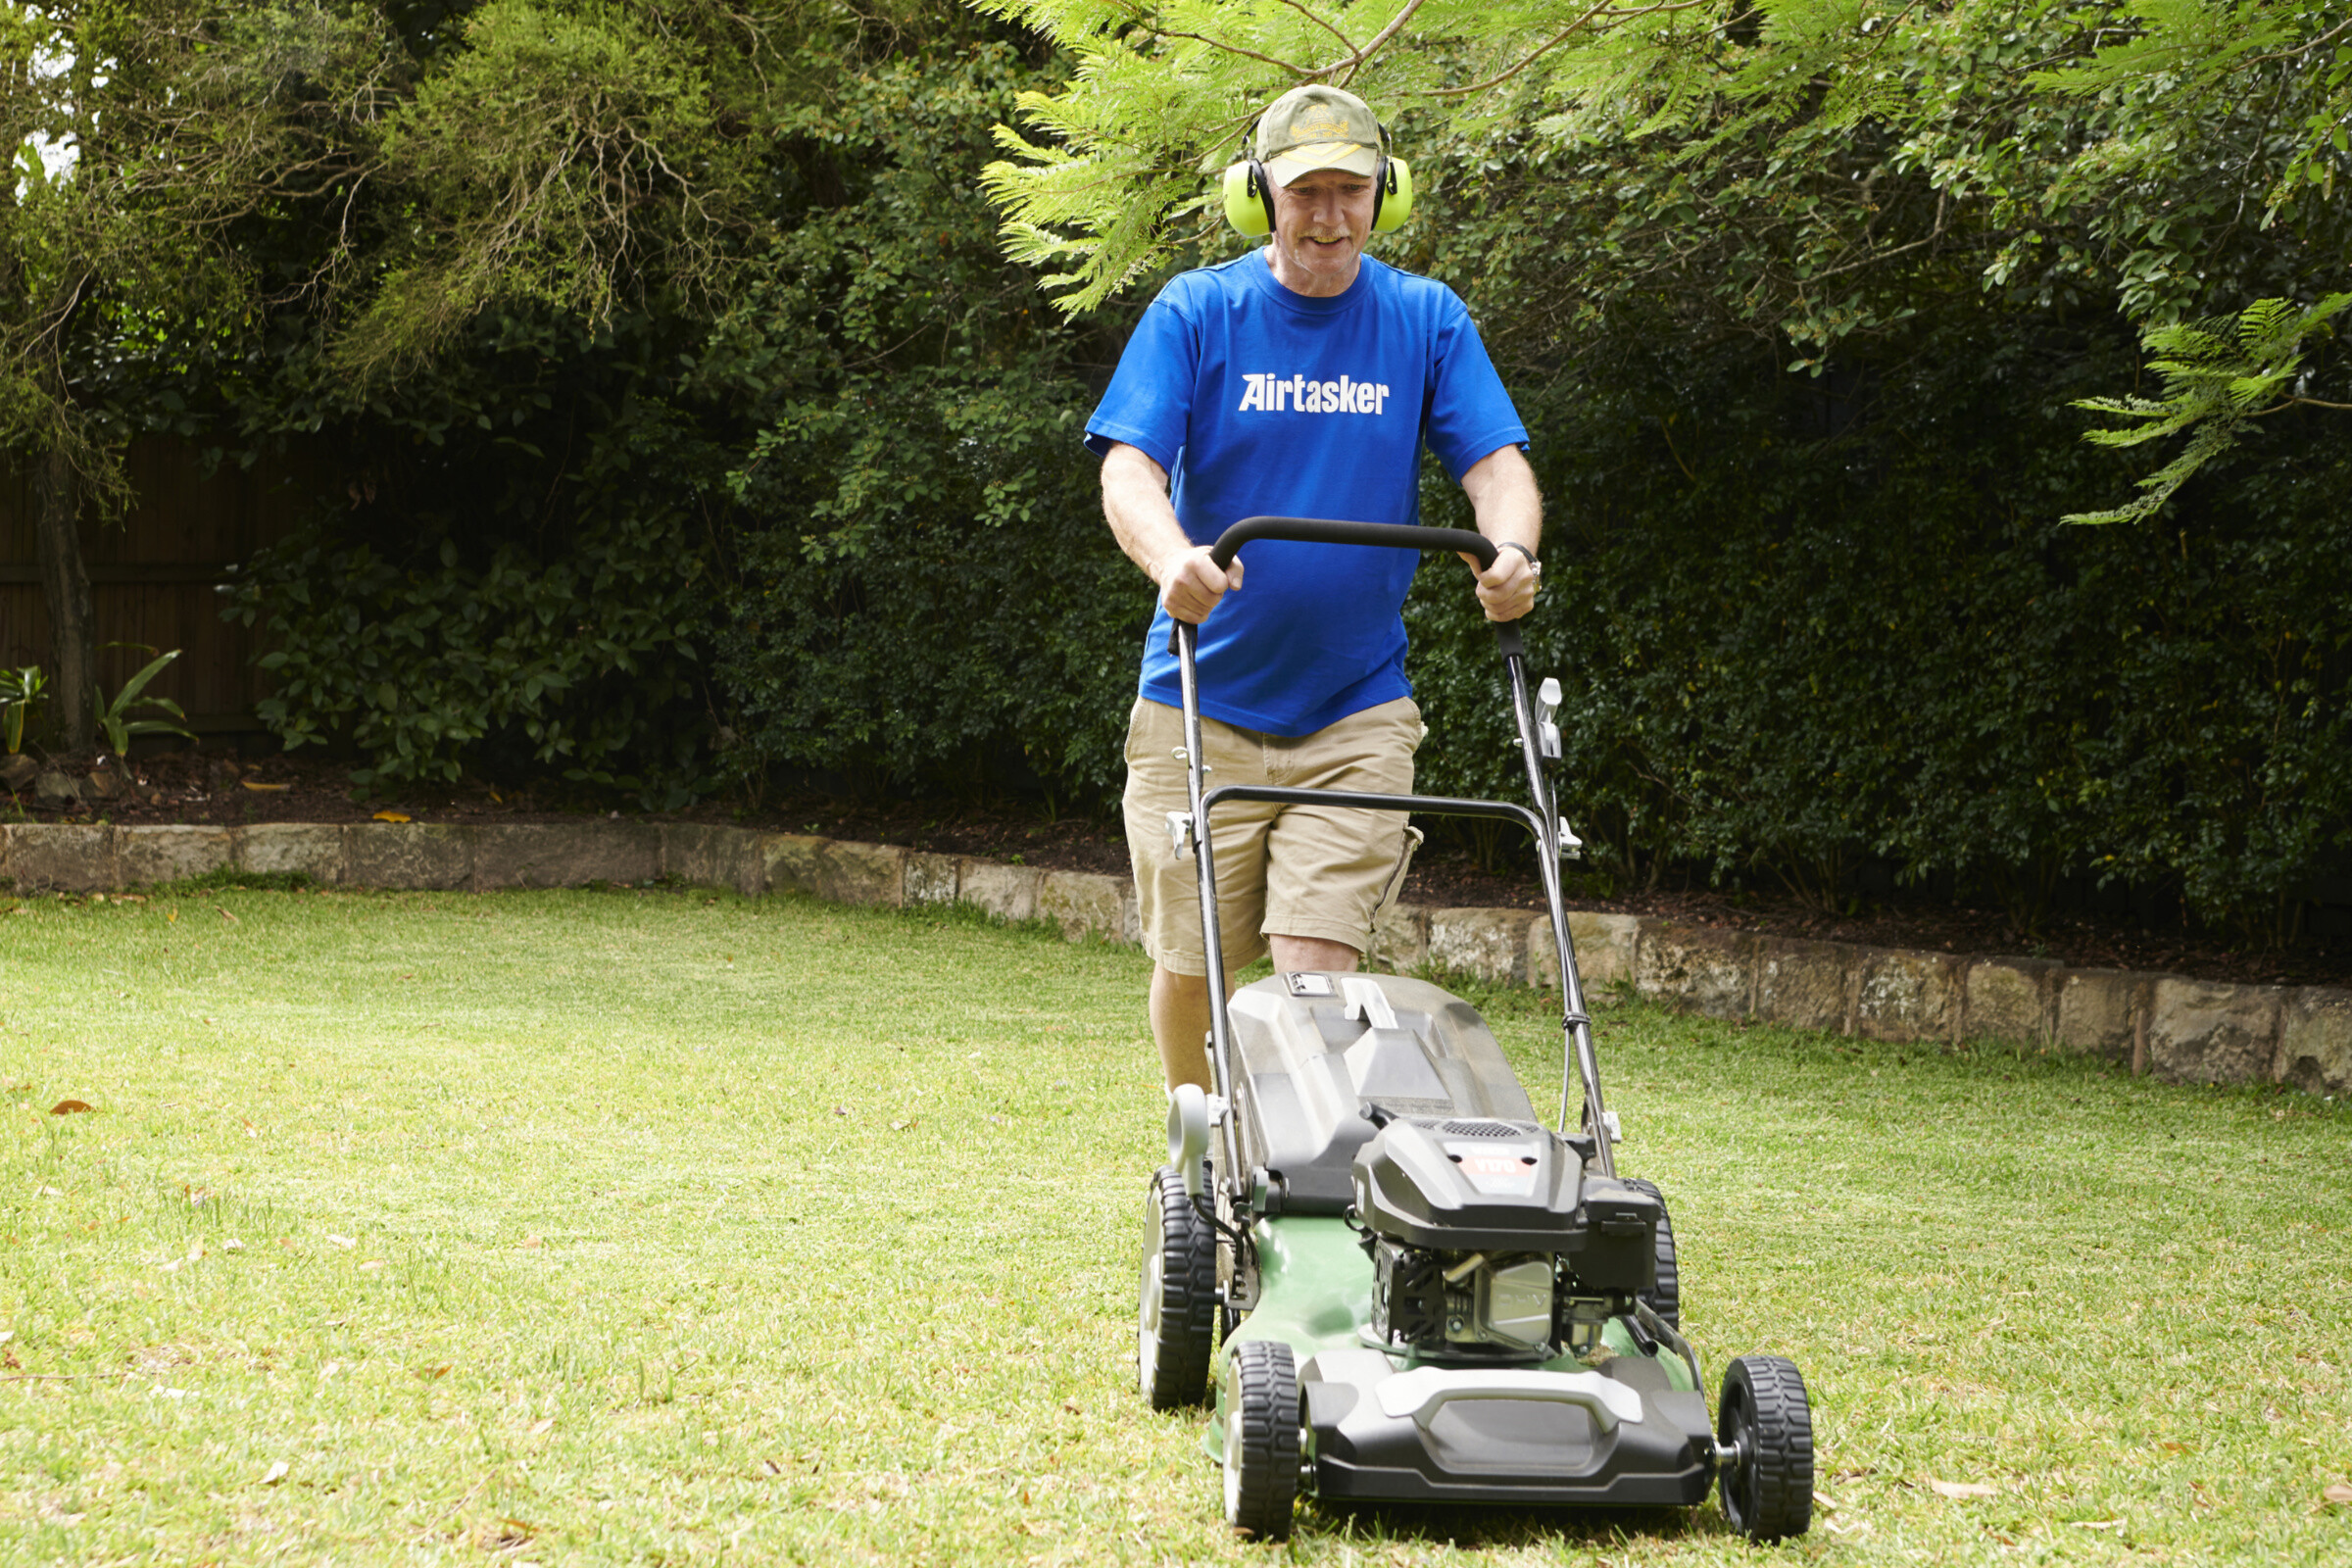 A neatly mowed lawn with vibrant green grass, surrounded by colorful flowers and a person using a lawnmower in the background.